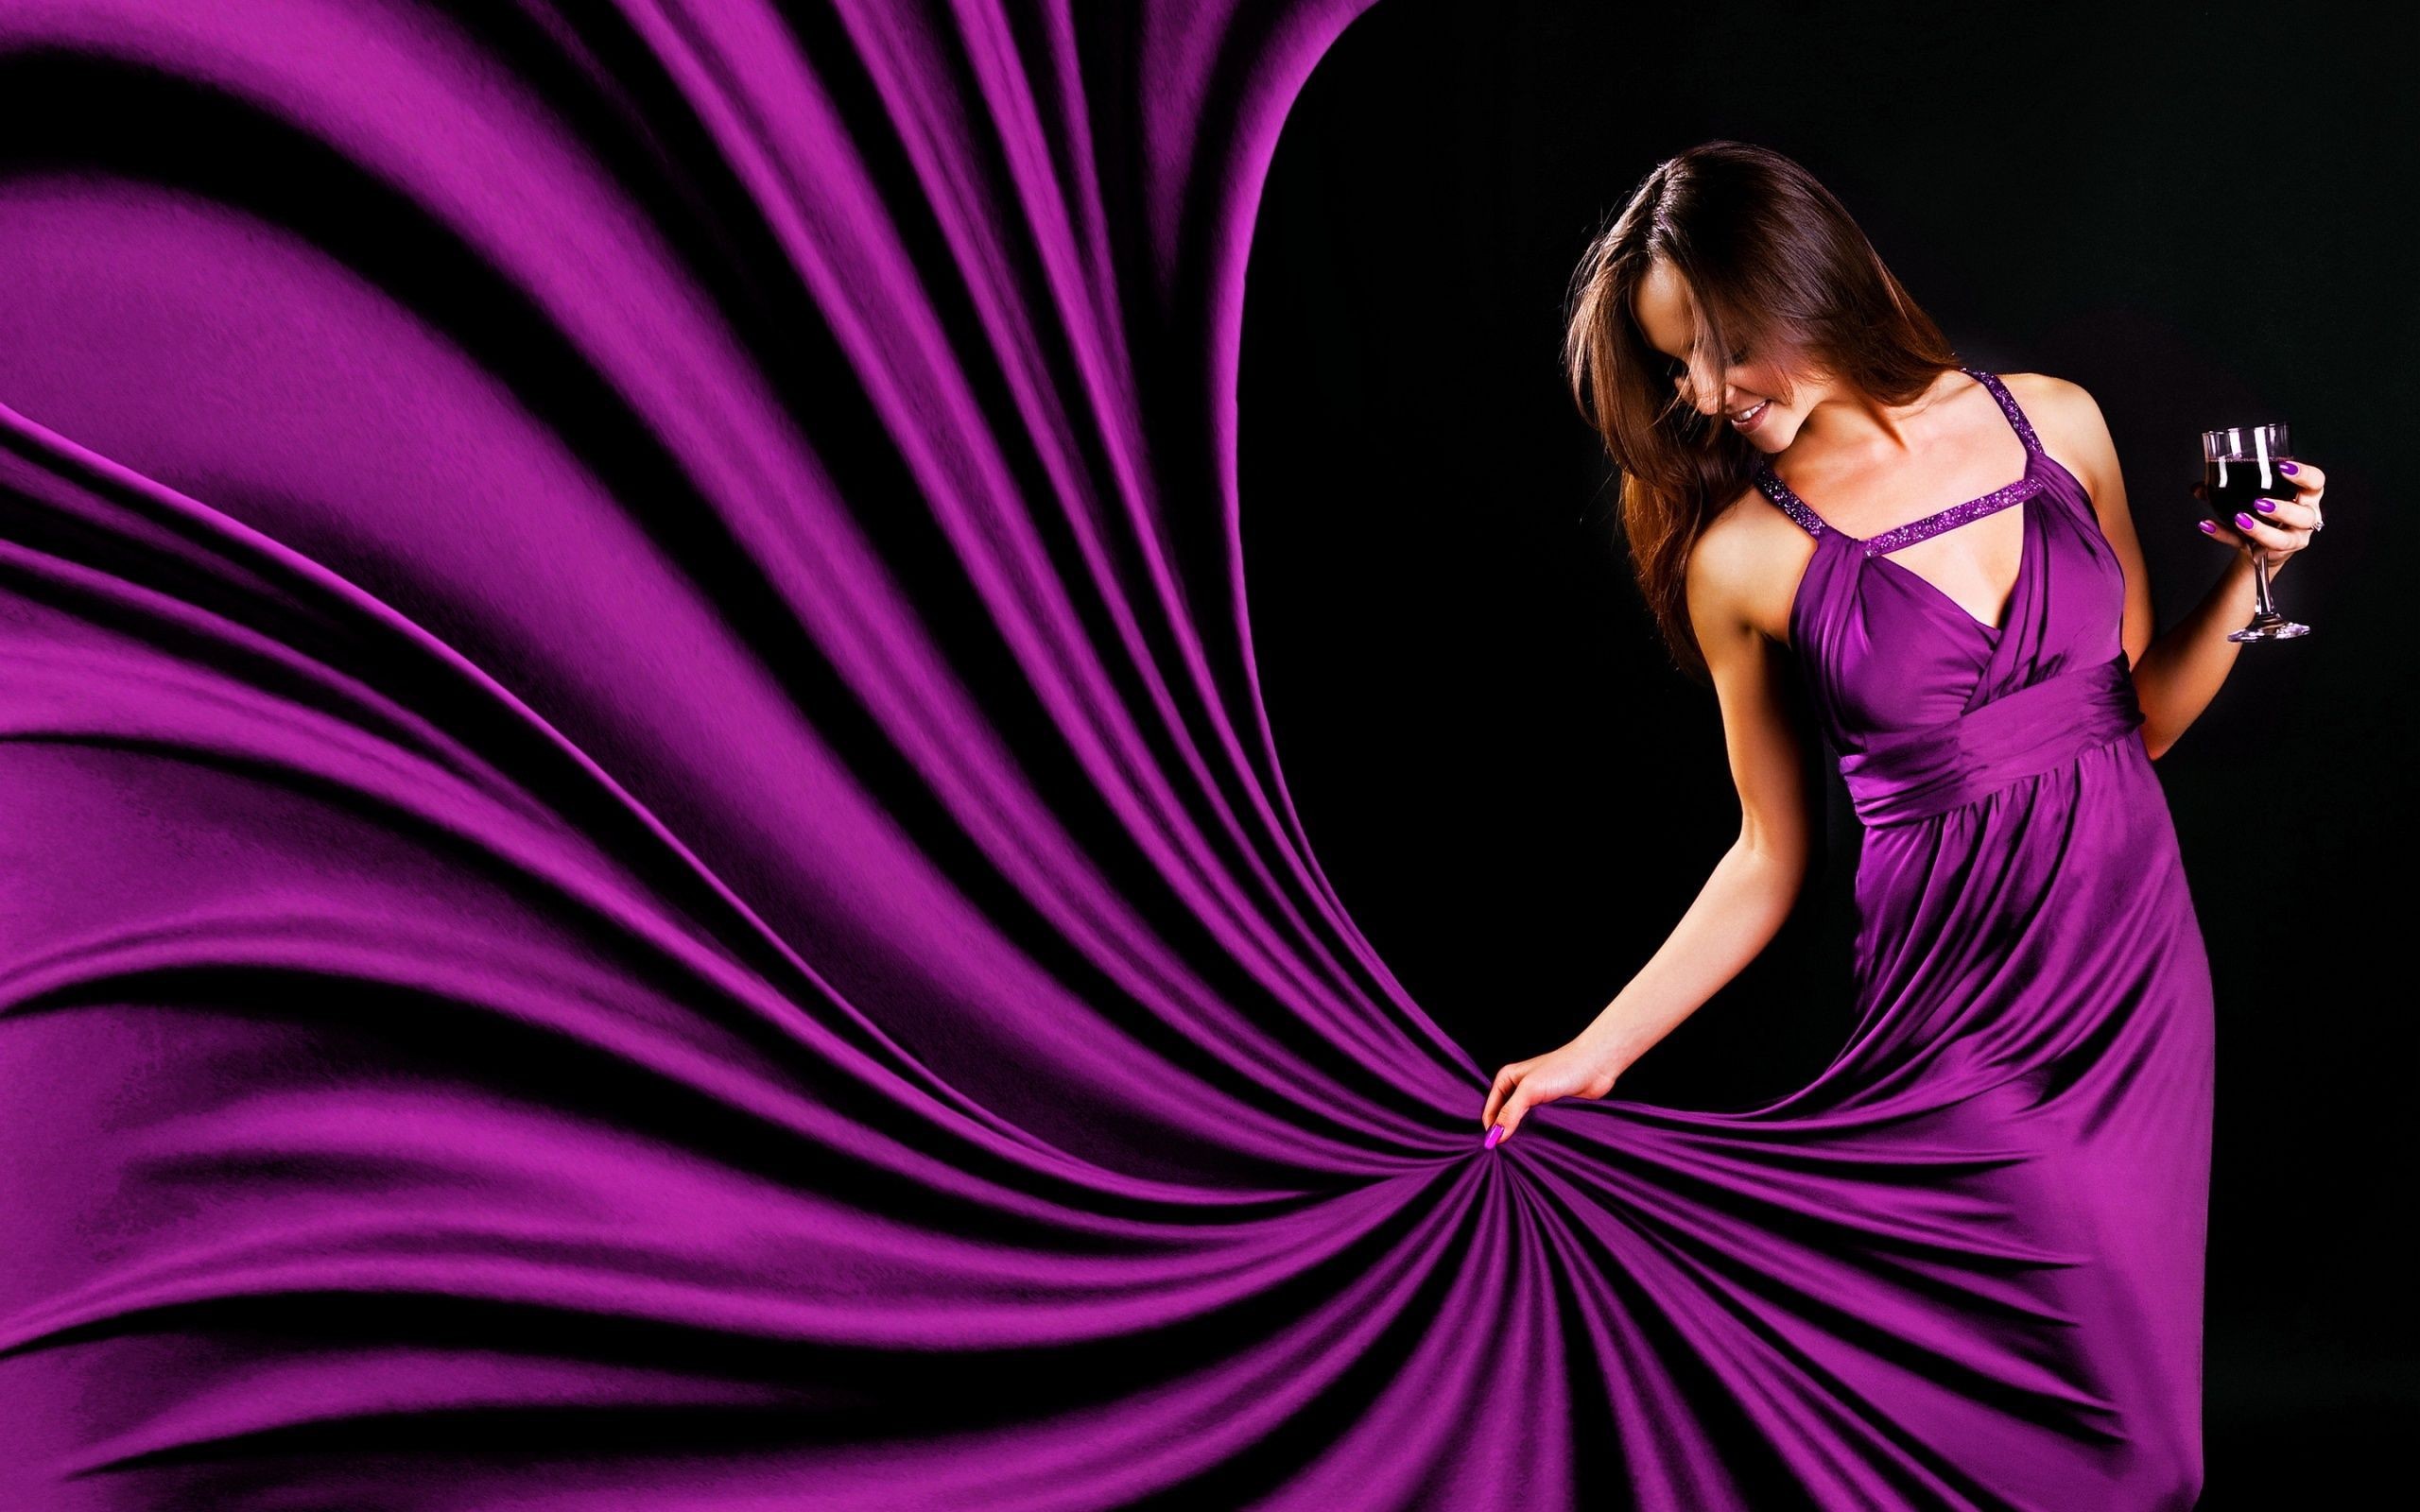 Girl in purple dress wallpapers and images   wallpapers pictures 2560x1600